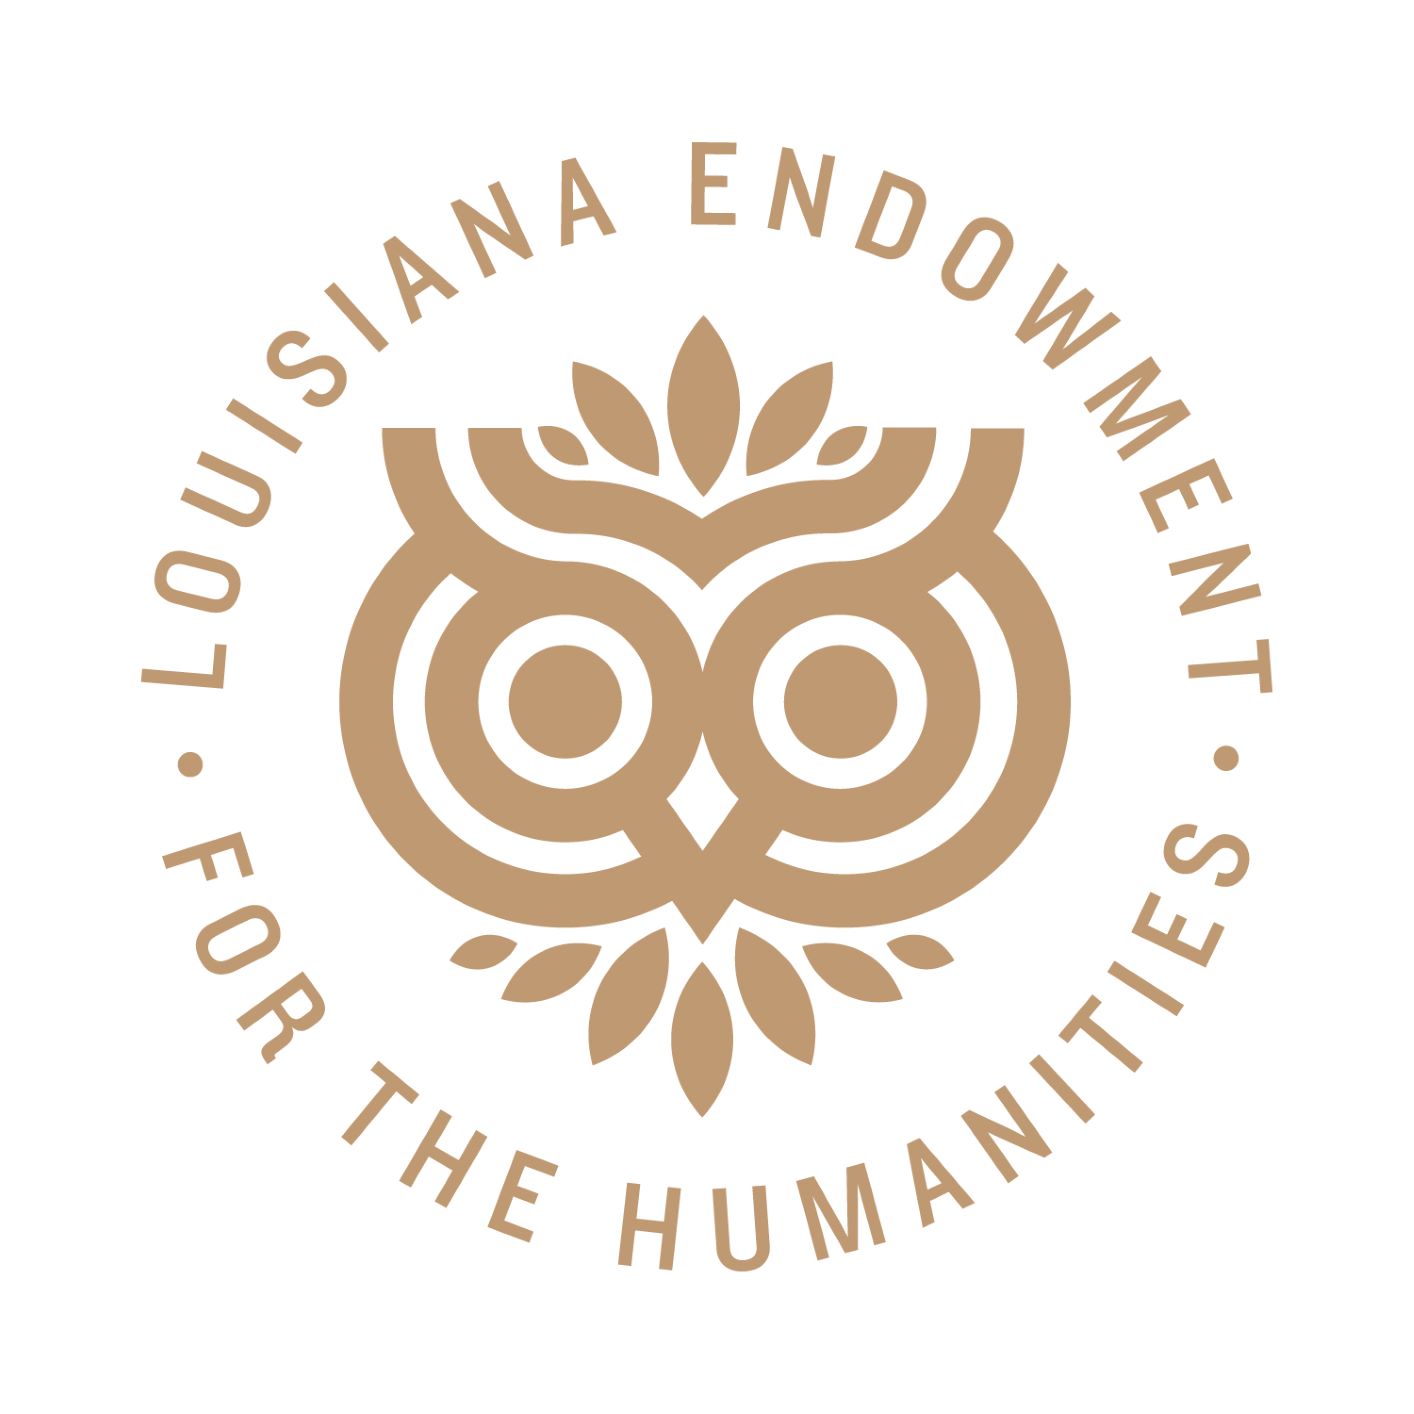 Image of the Louisiana Endowment for the Humanities logo